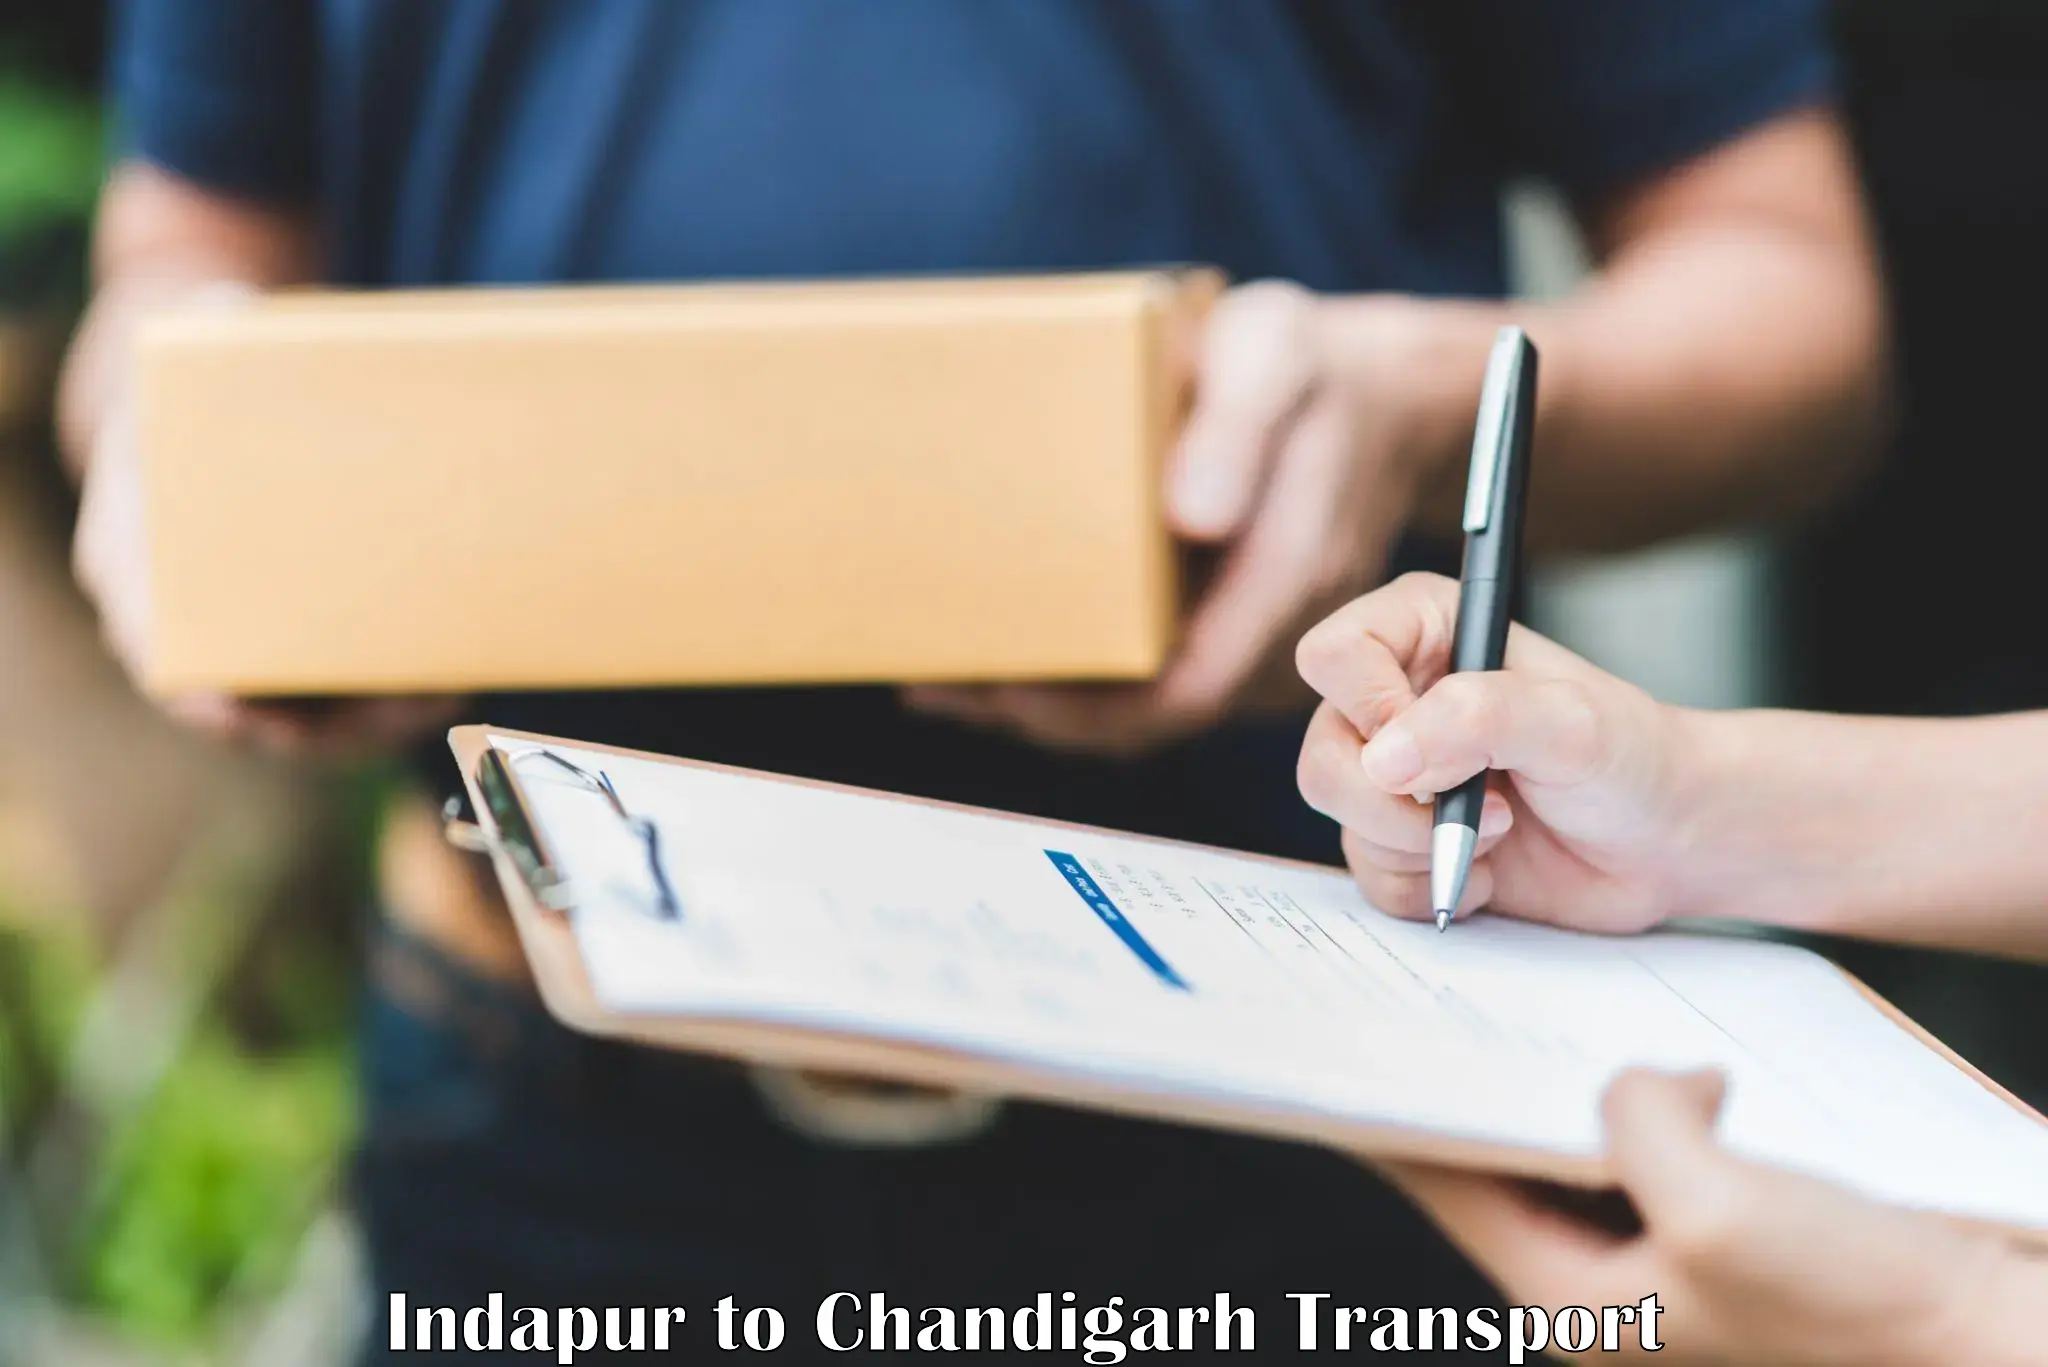 Delivery service Indapur to Chandigarh